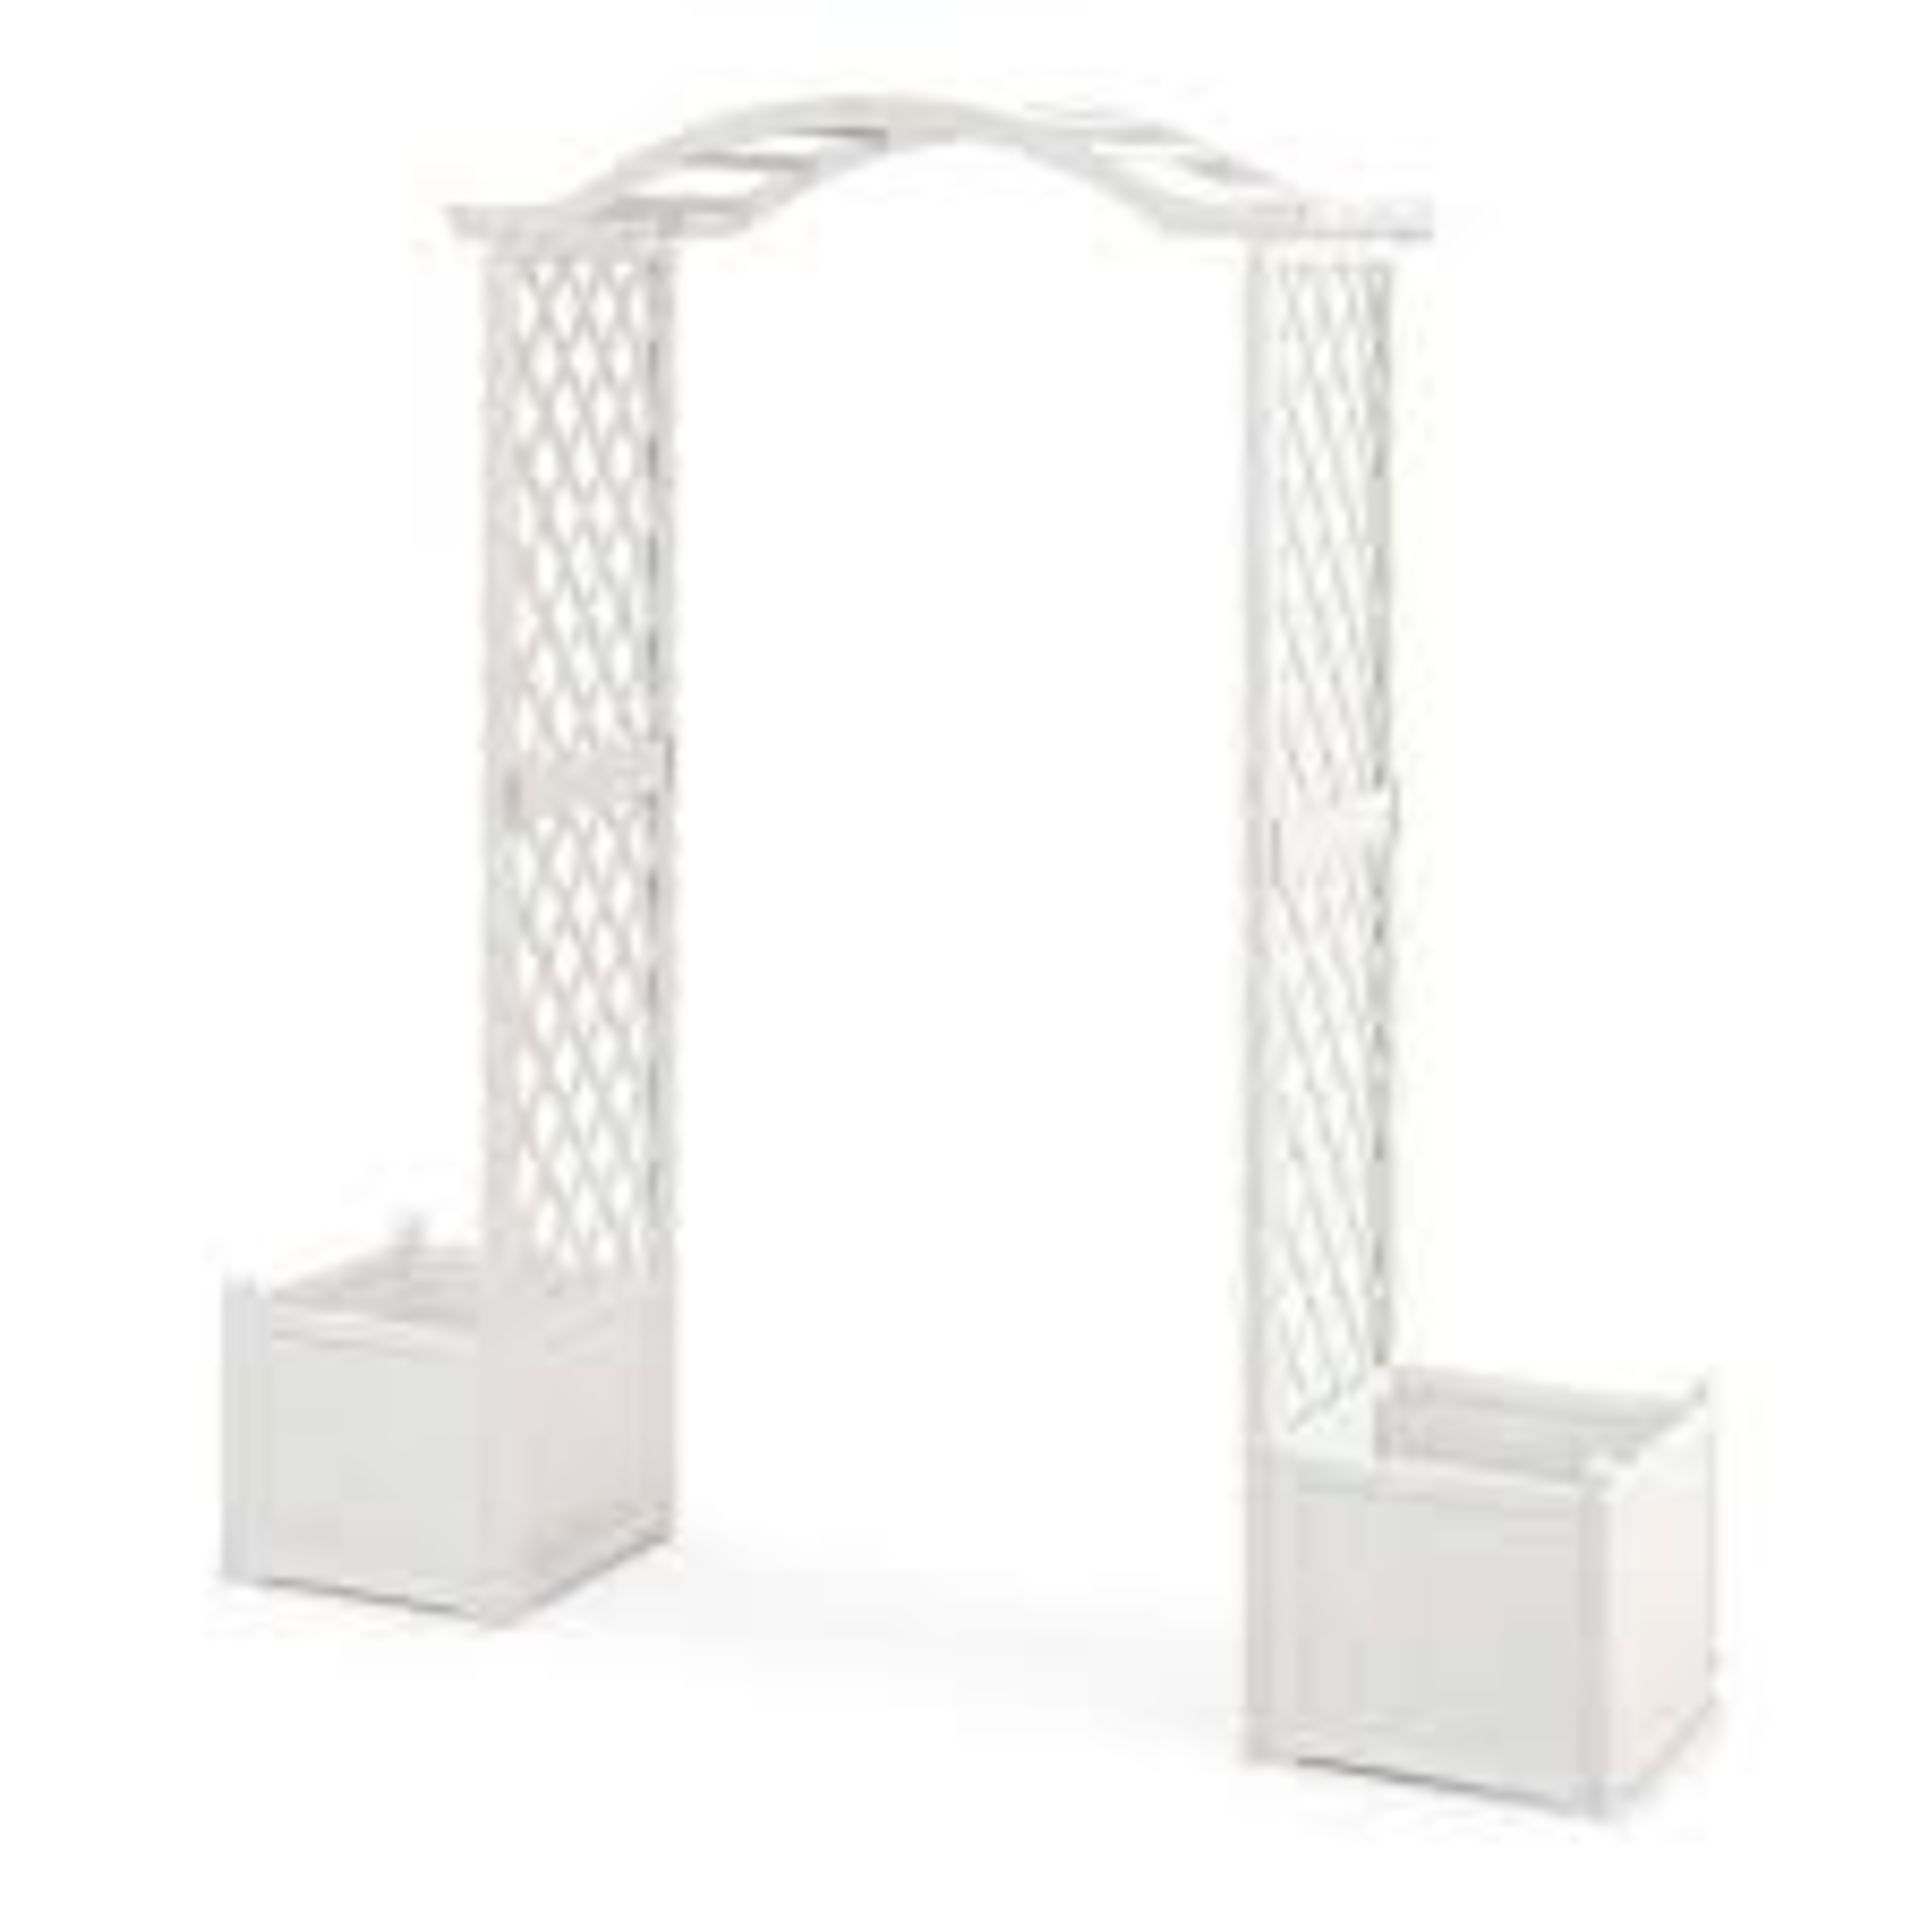 ProTect Garden Timber Arbour with Planter. - R14.15. Fir wood is gifted from nature and last for a